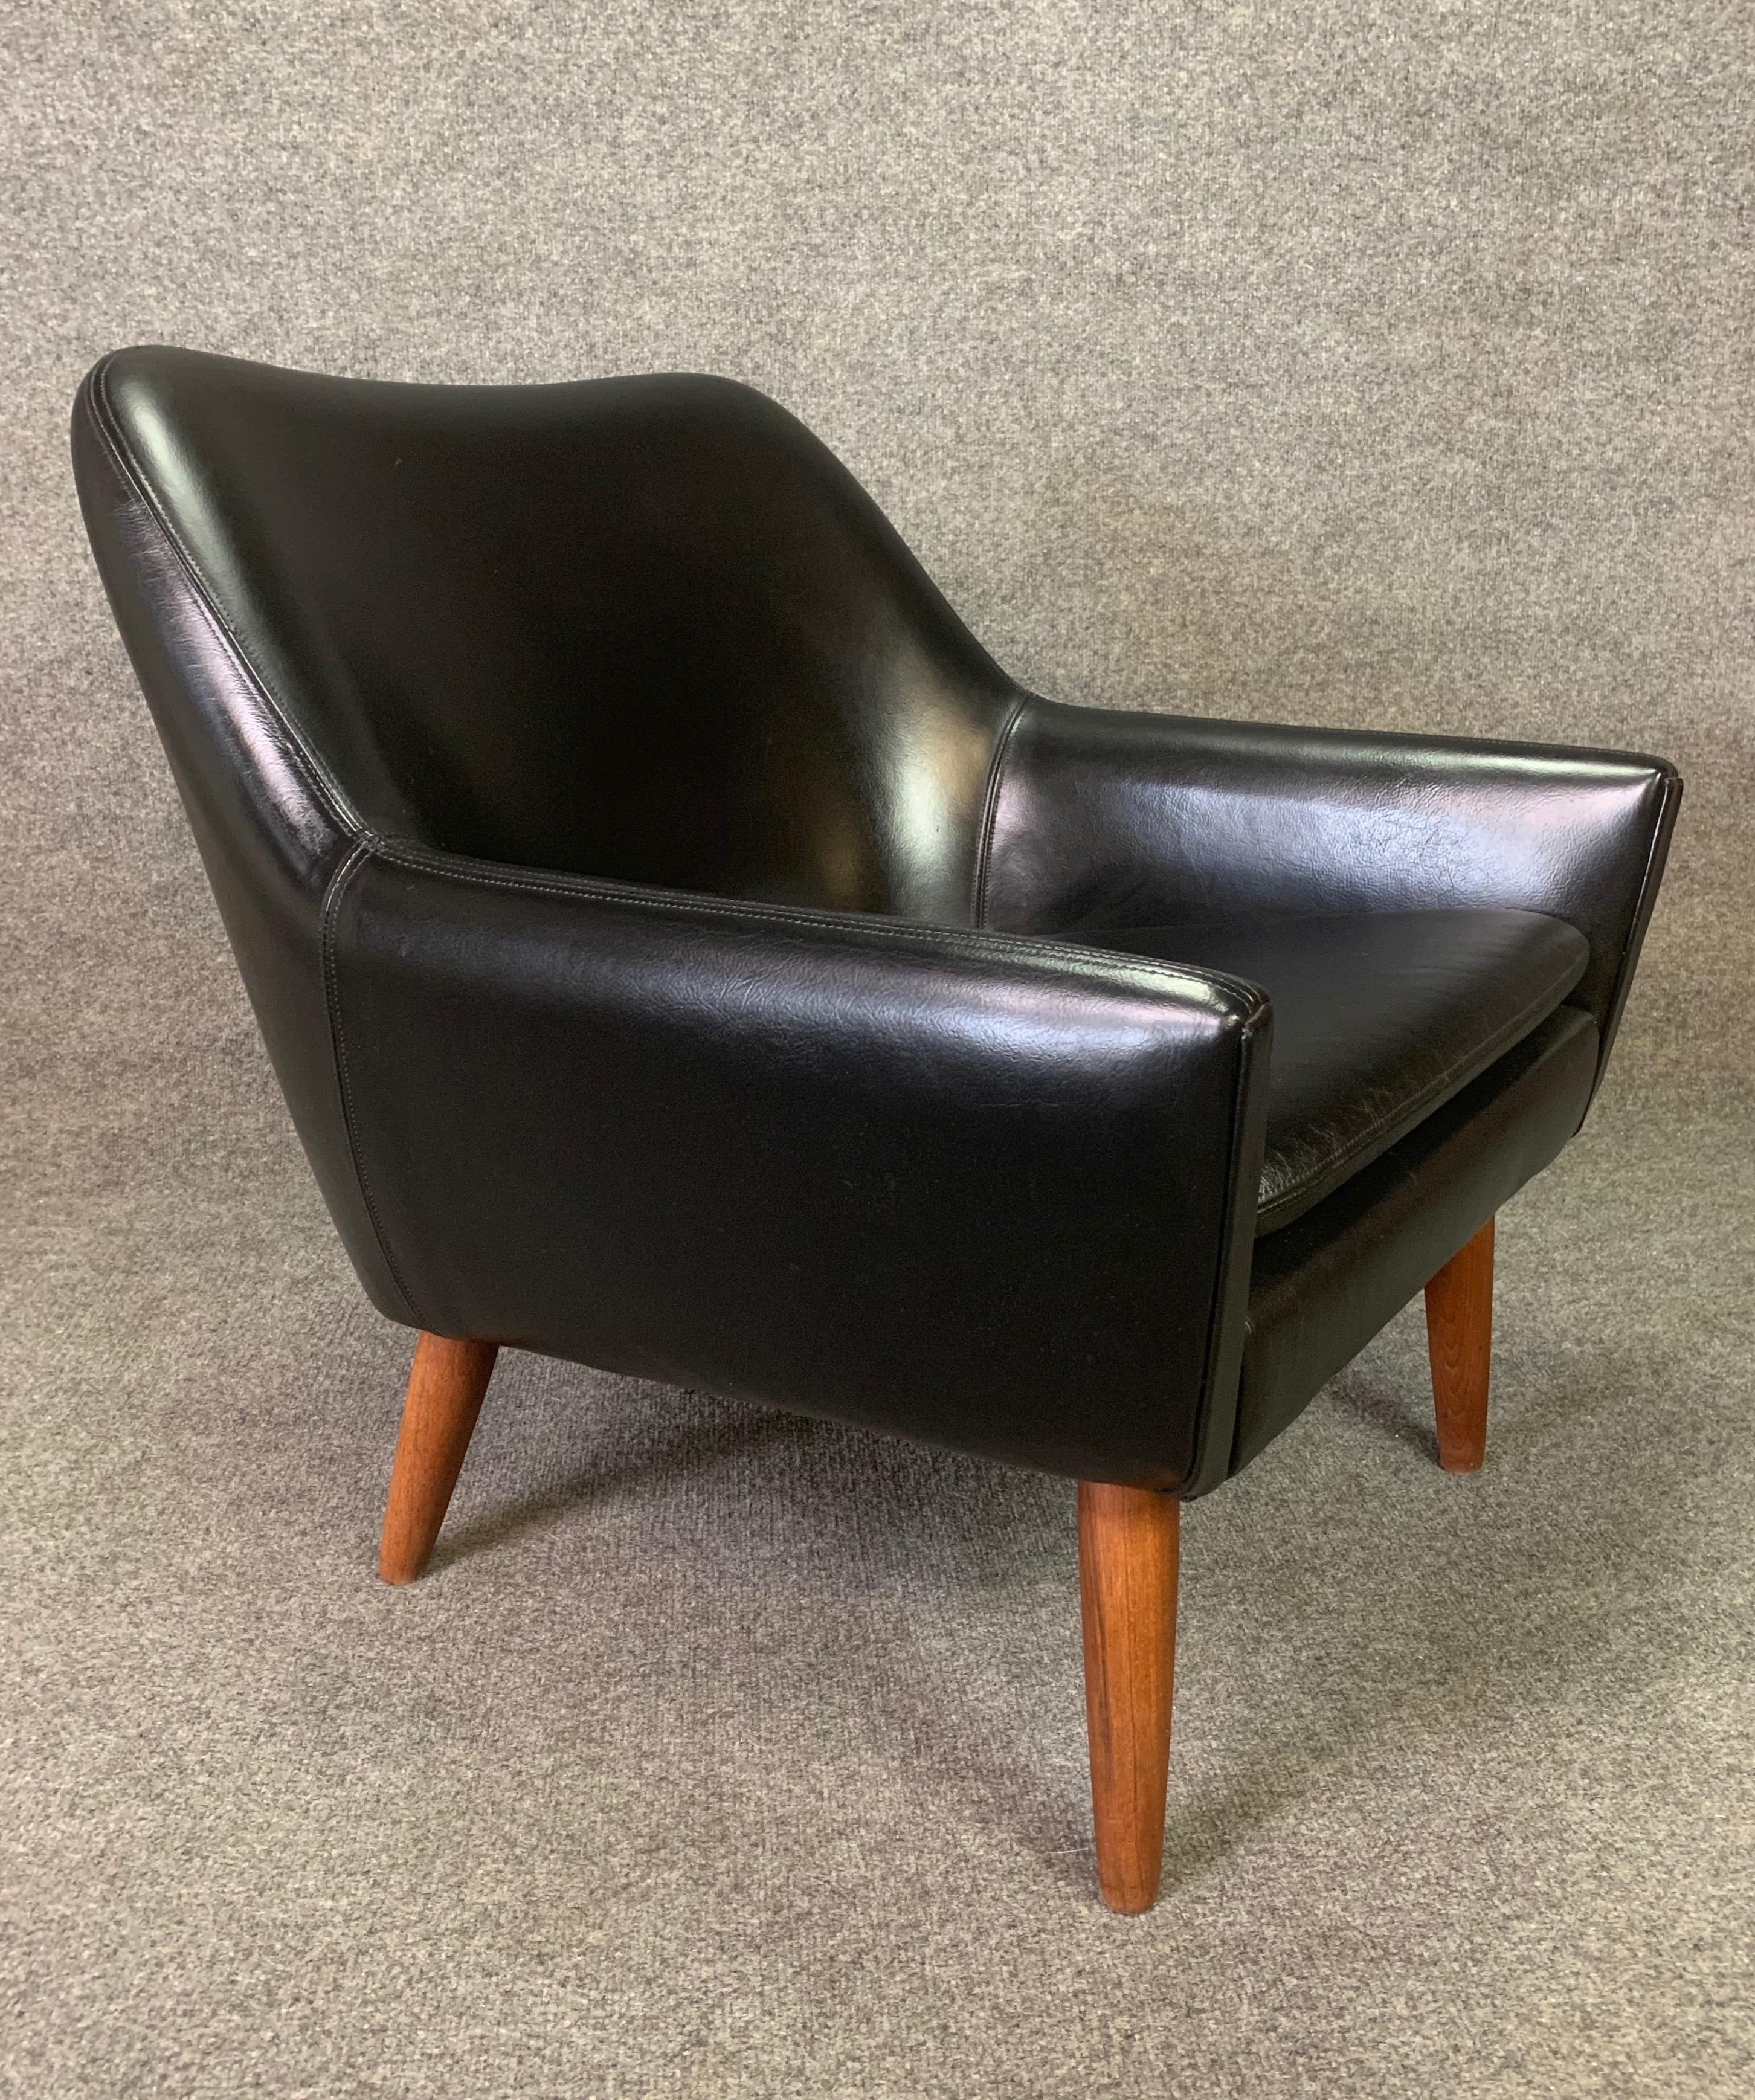 Hand-Crafted Vintage Danish Mid-Century Modern Leather and Teak Lounge Chair For Sale